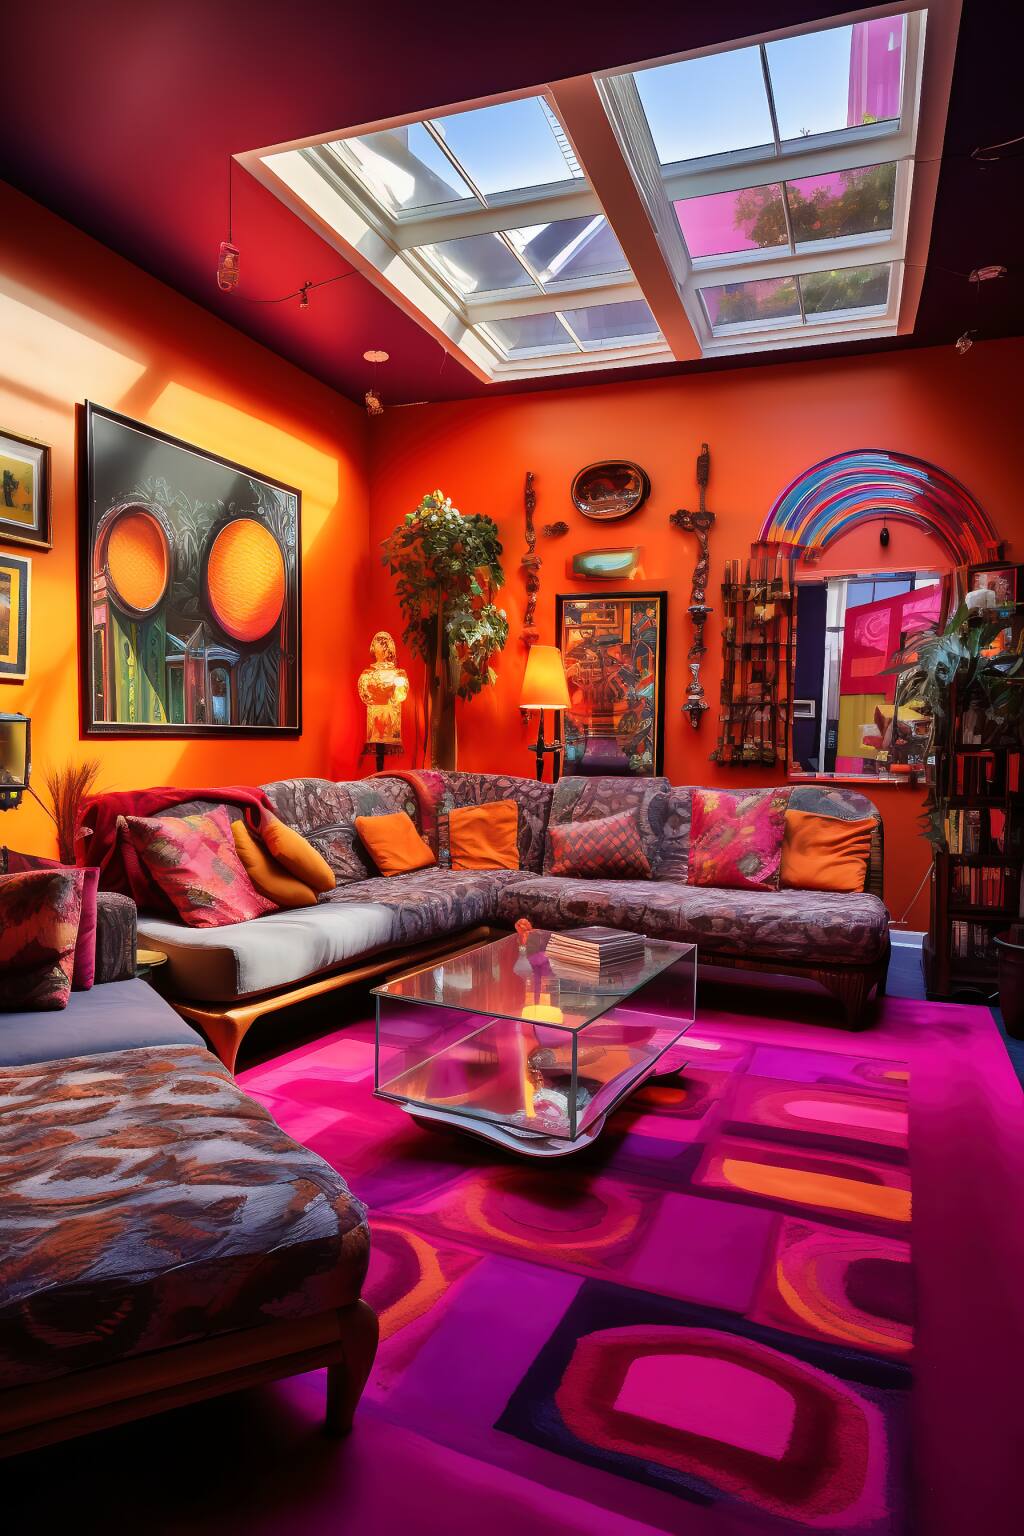 Modern Bohemian Living Room In Fuchsia And Lime, Featuring A Sleek Sectional, Contemporary Artwork, And Vibrant Cushions.